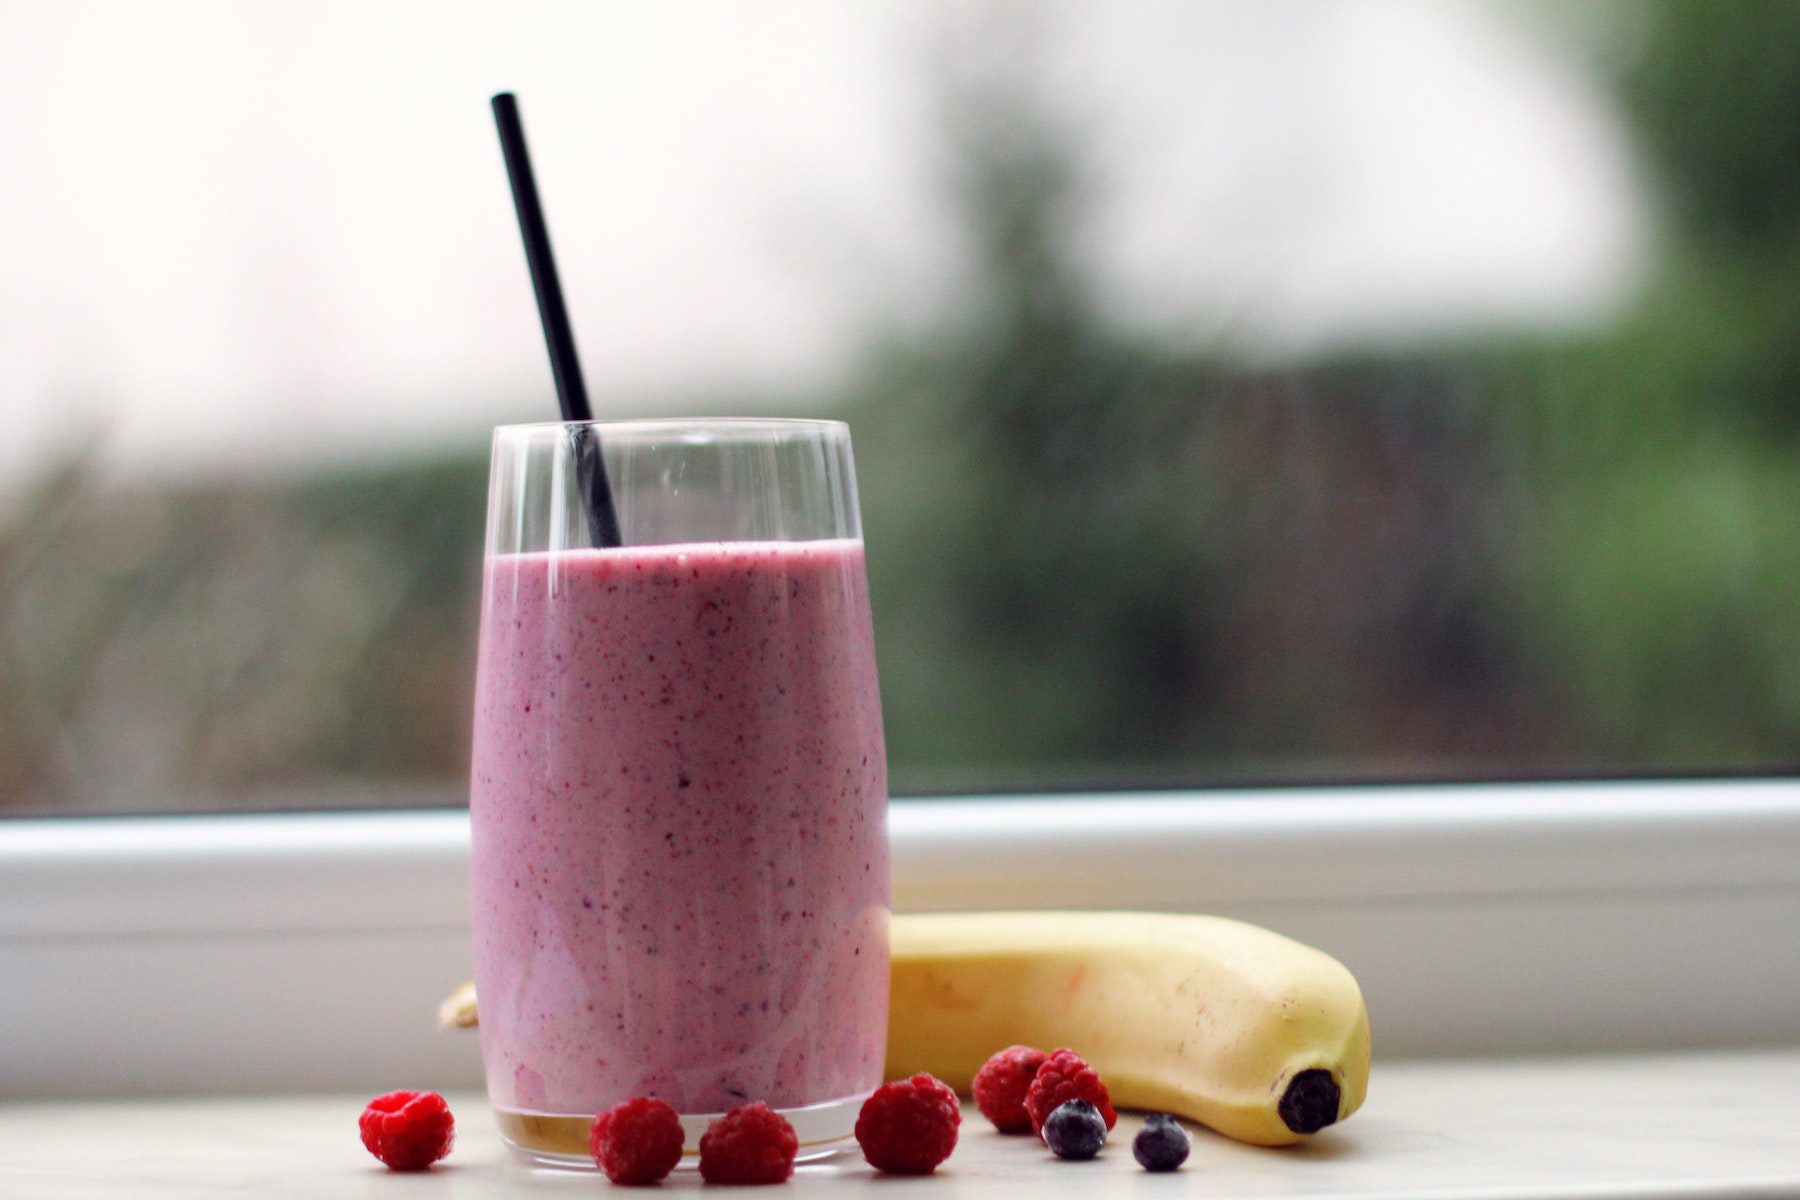 Pink, berry smoothie in a glass with black straw sitting in front of a window with a banana, raspberries and blueberries